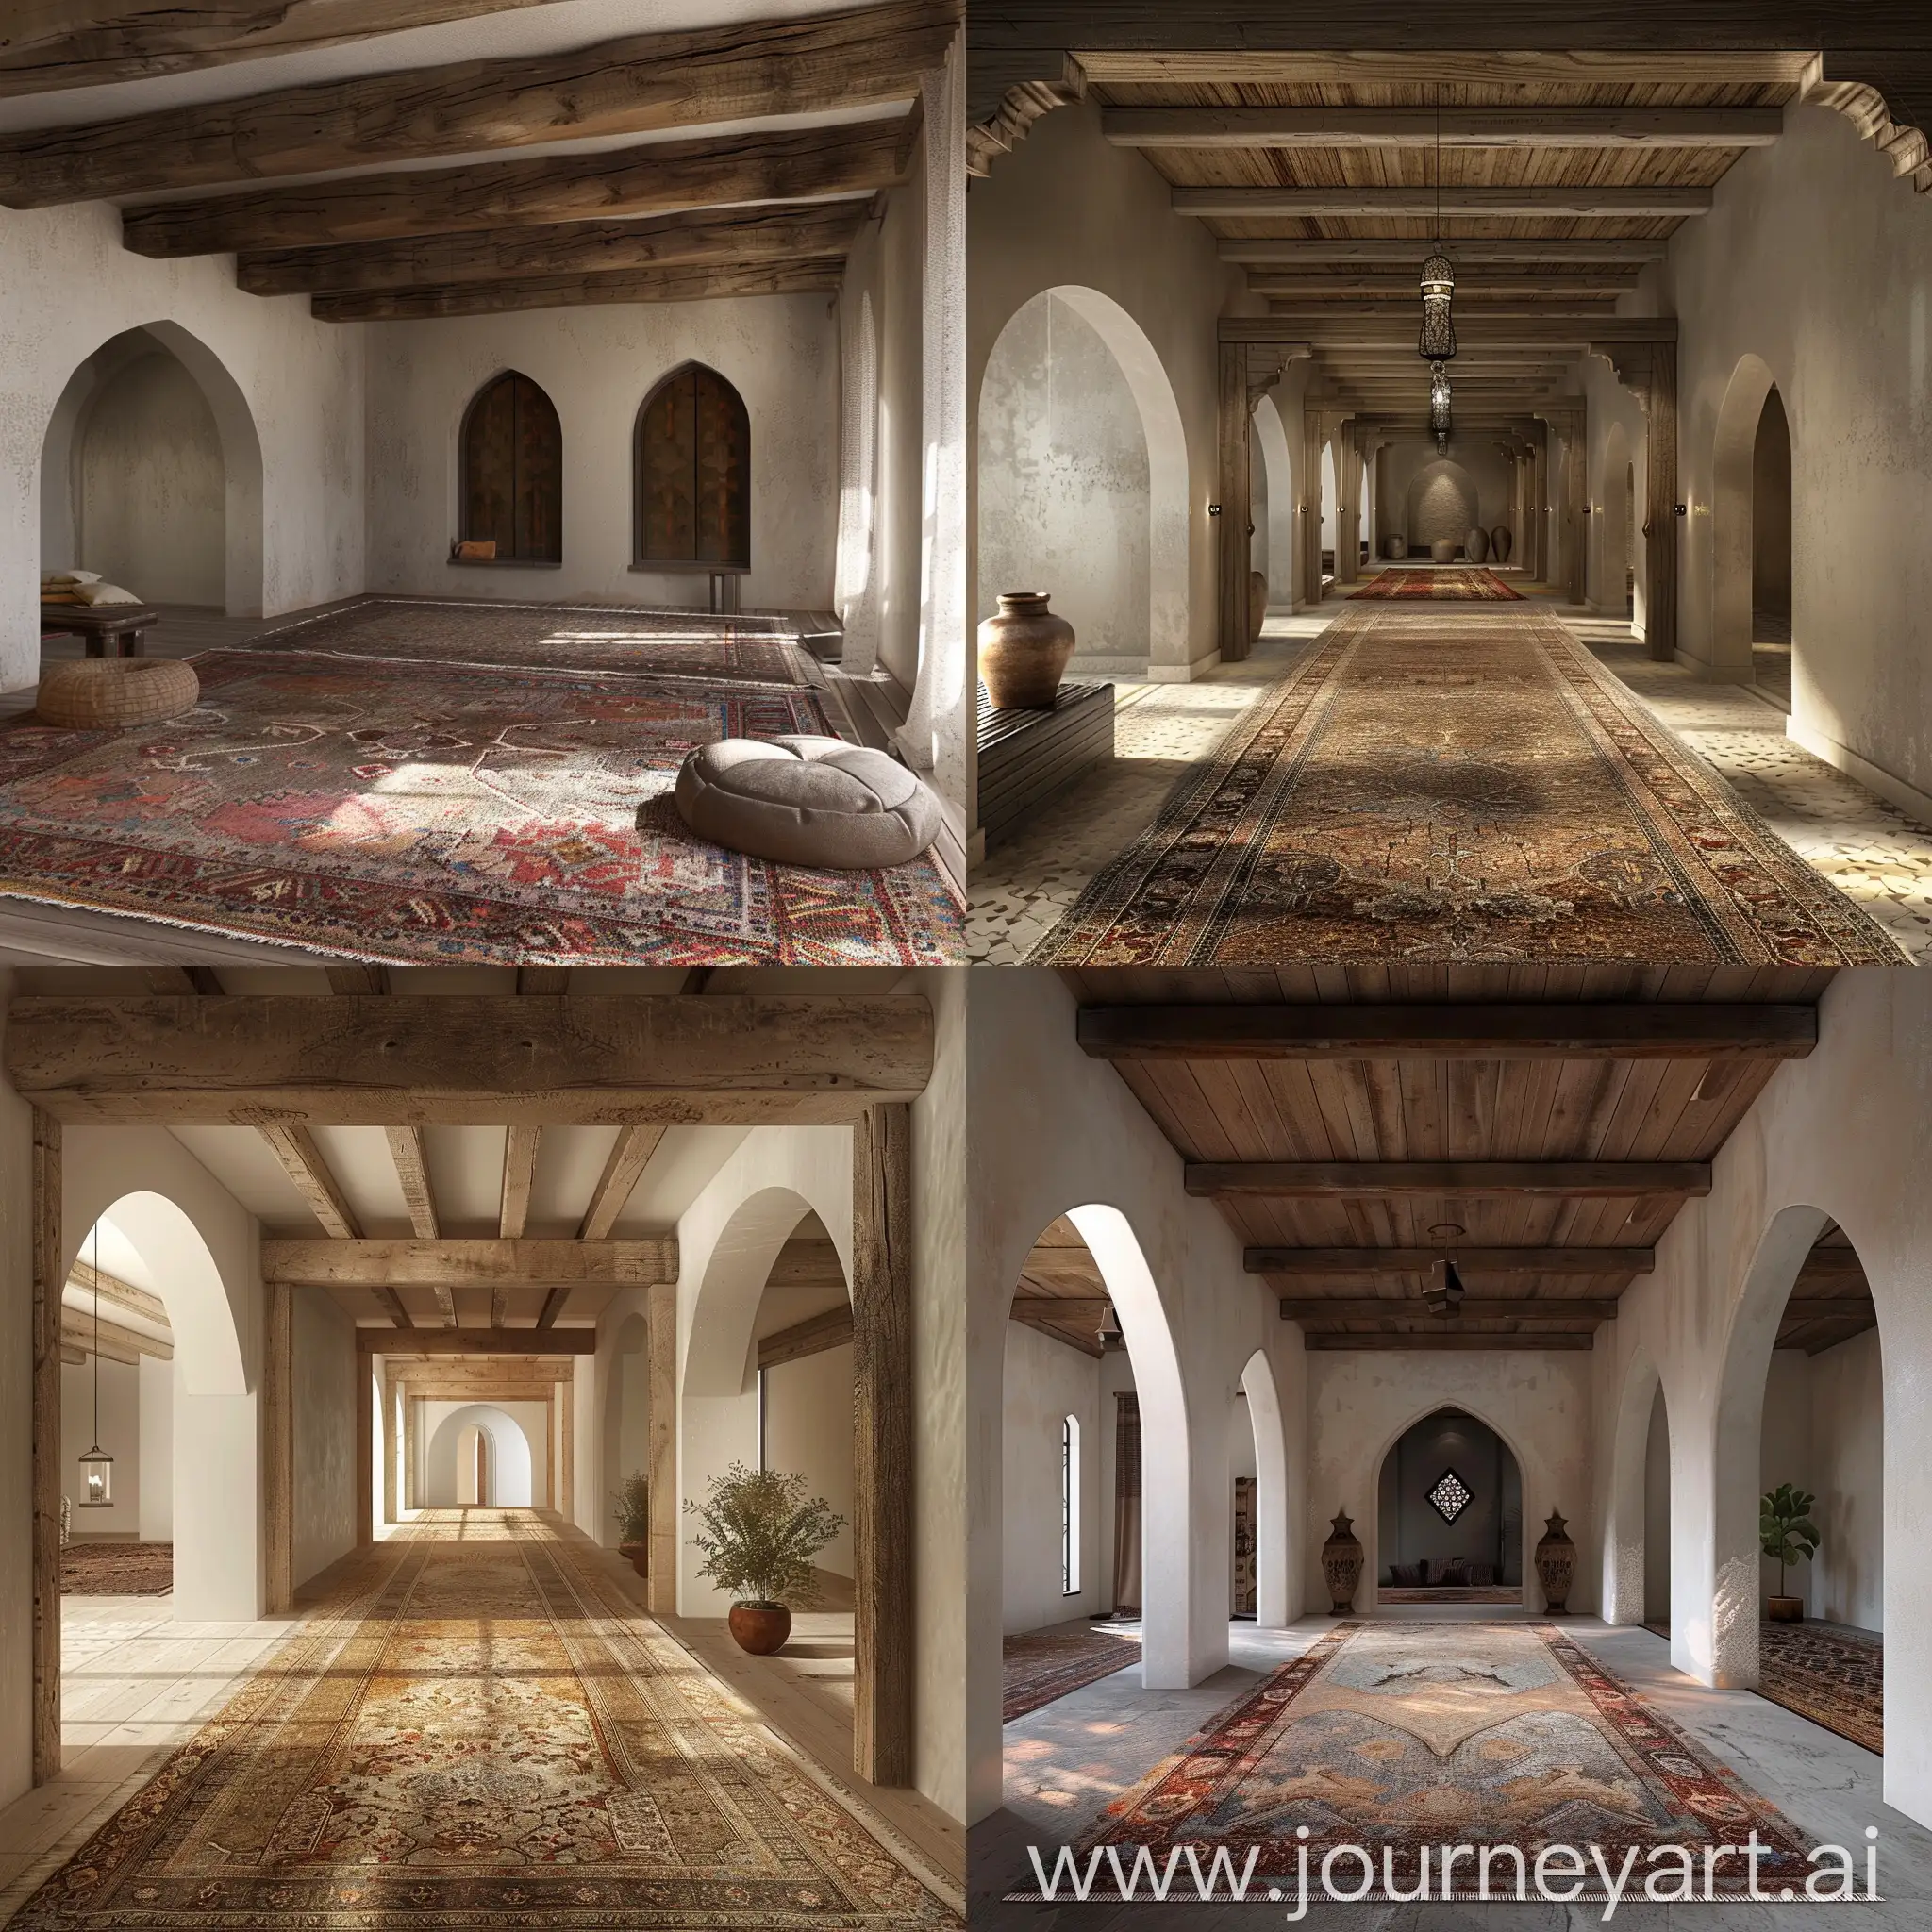 i want an interior of contemporary architecture with a rustic flair. arabic carpets with wooden beams some illusion arches